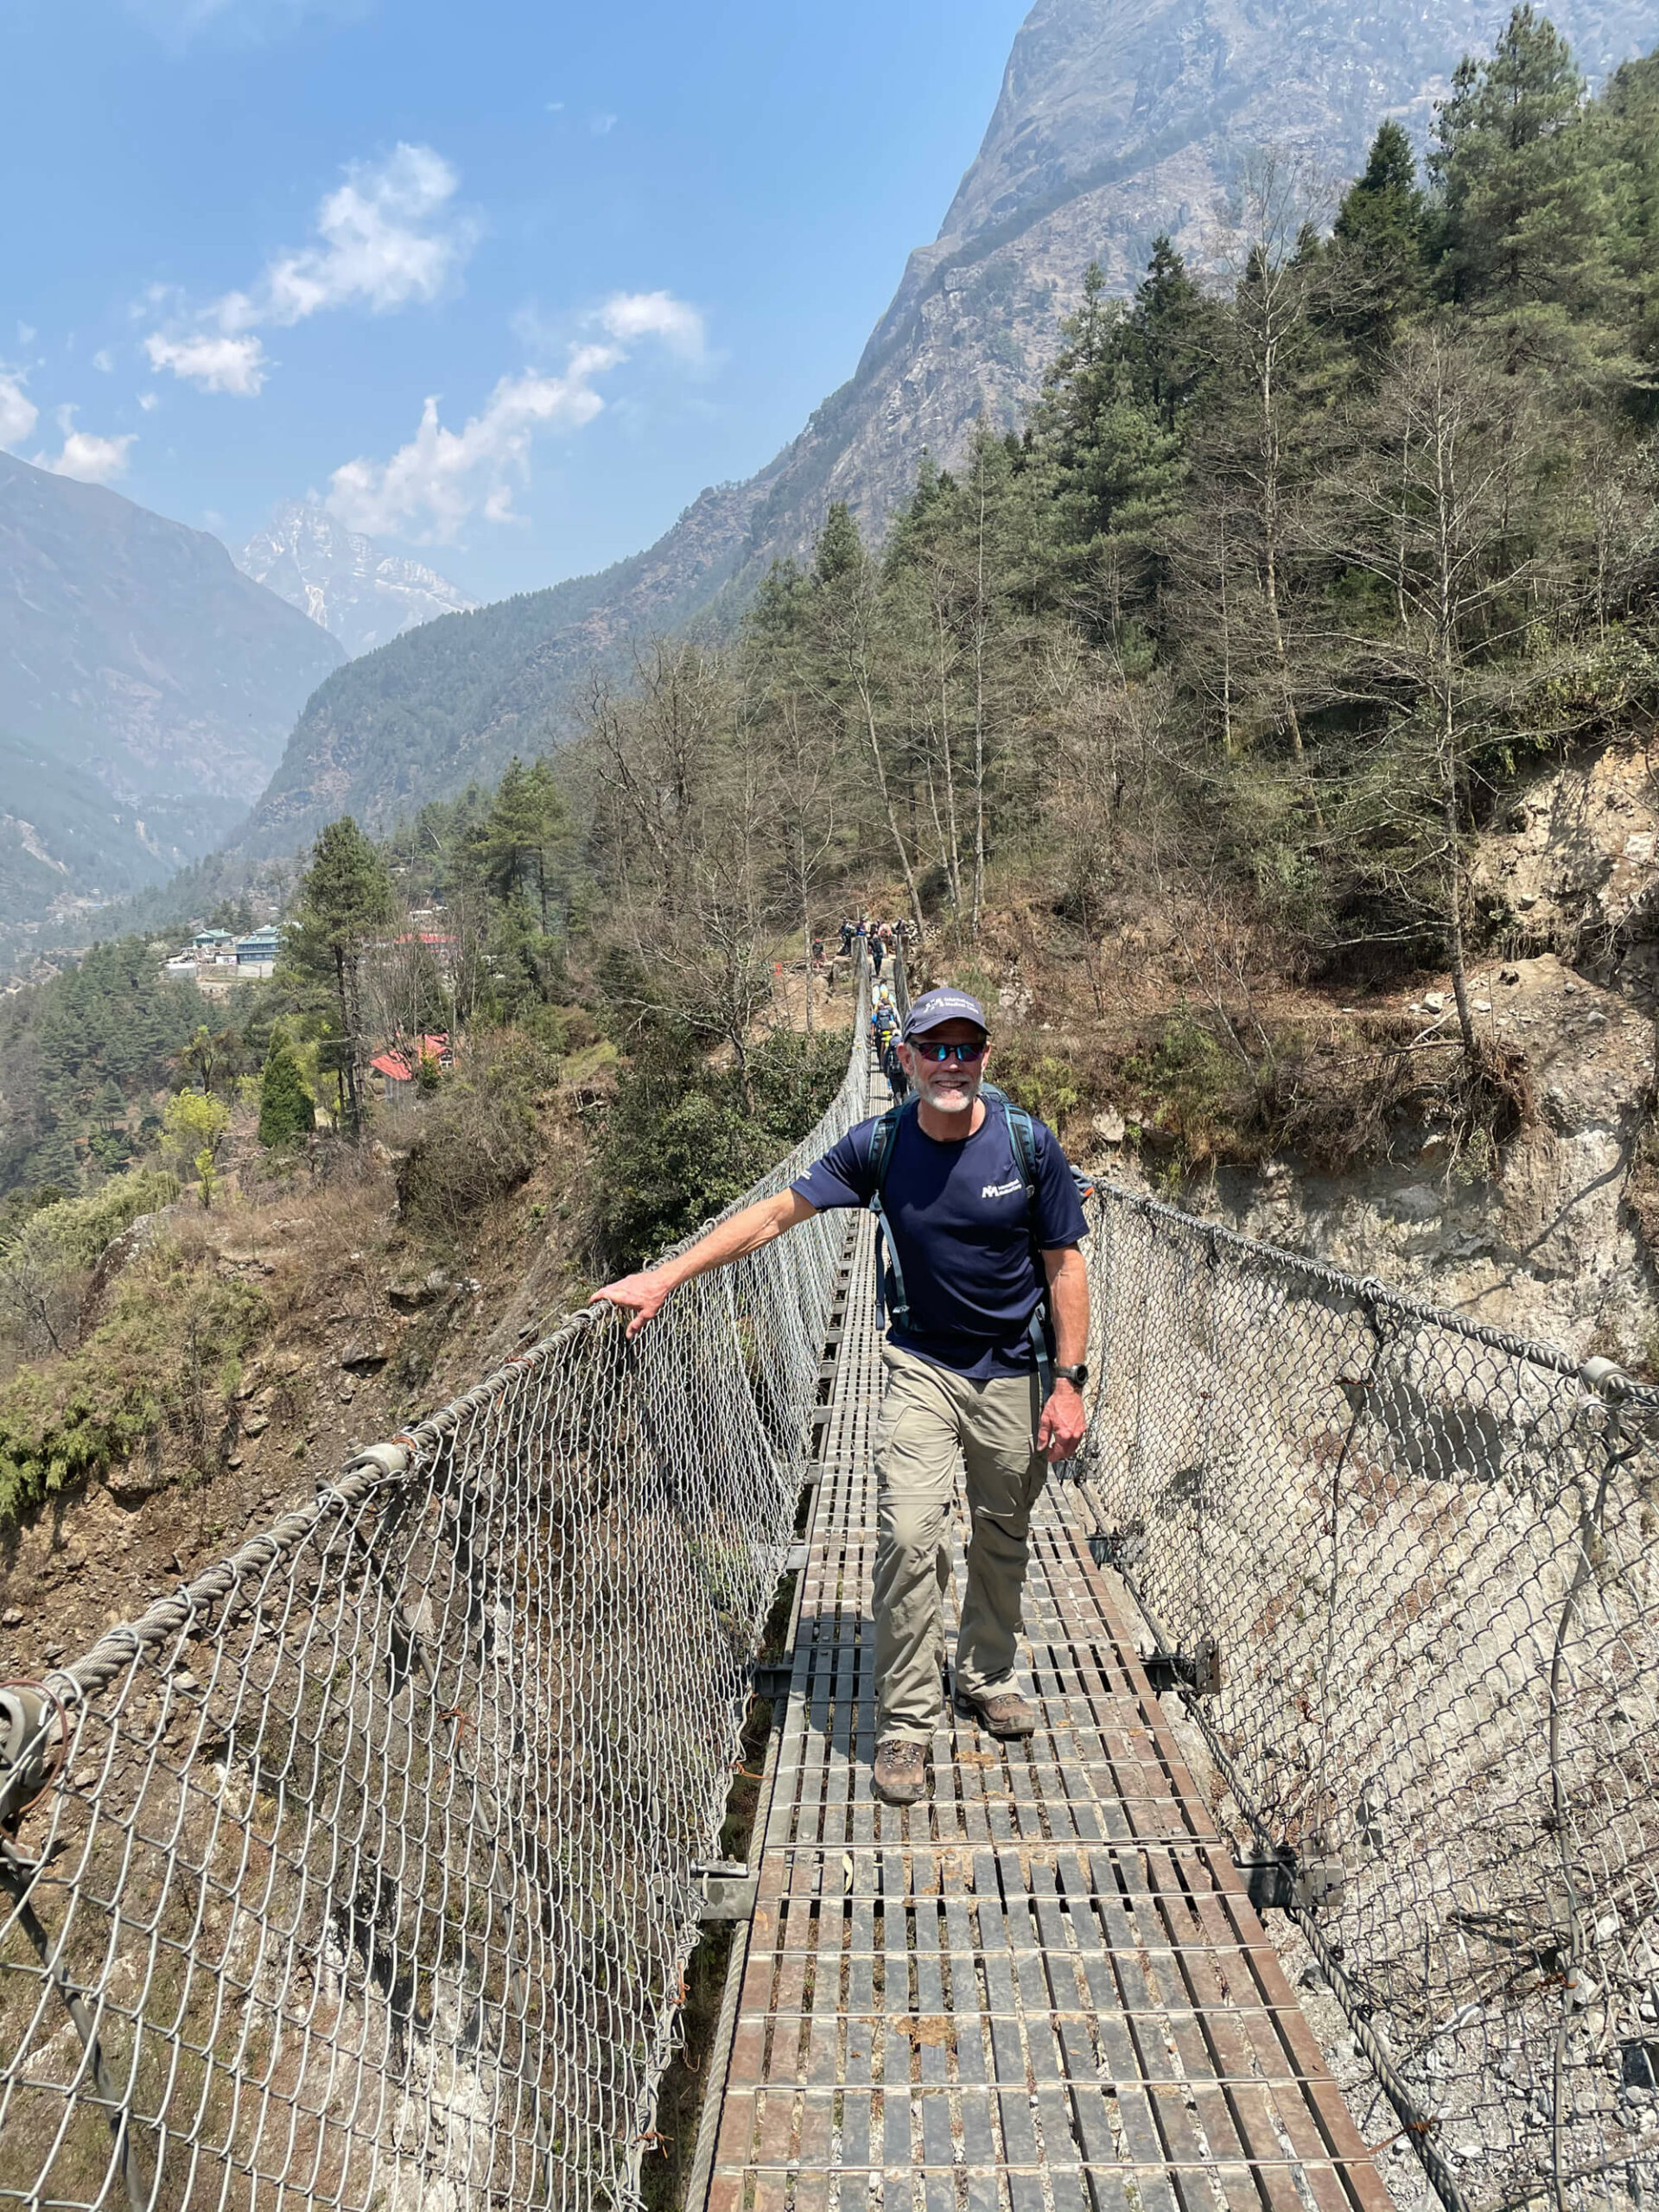 Dr. Michael Paterson has arrived in Nepal and started the final steps of training for his climb of a lifetime.